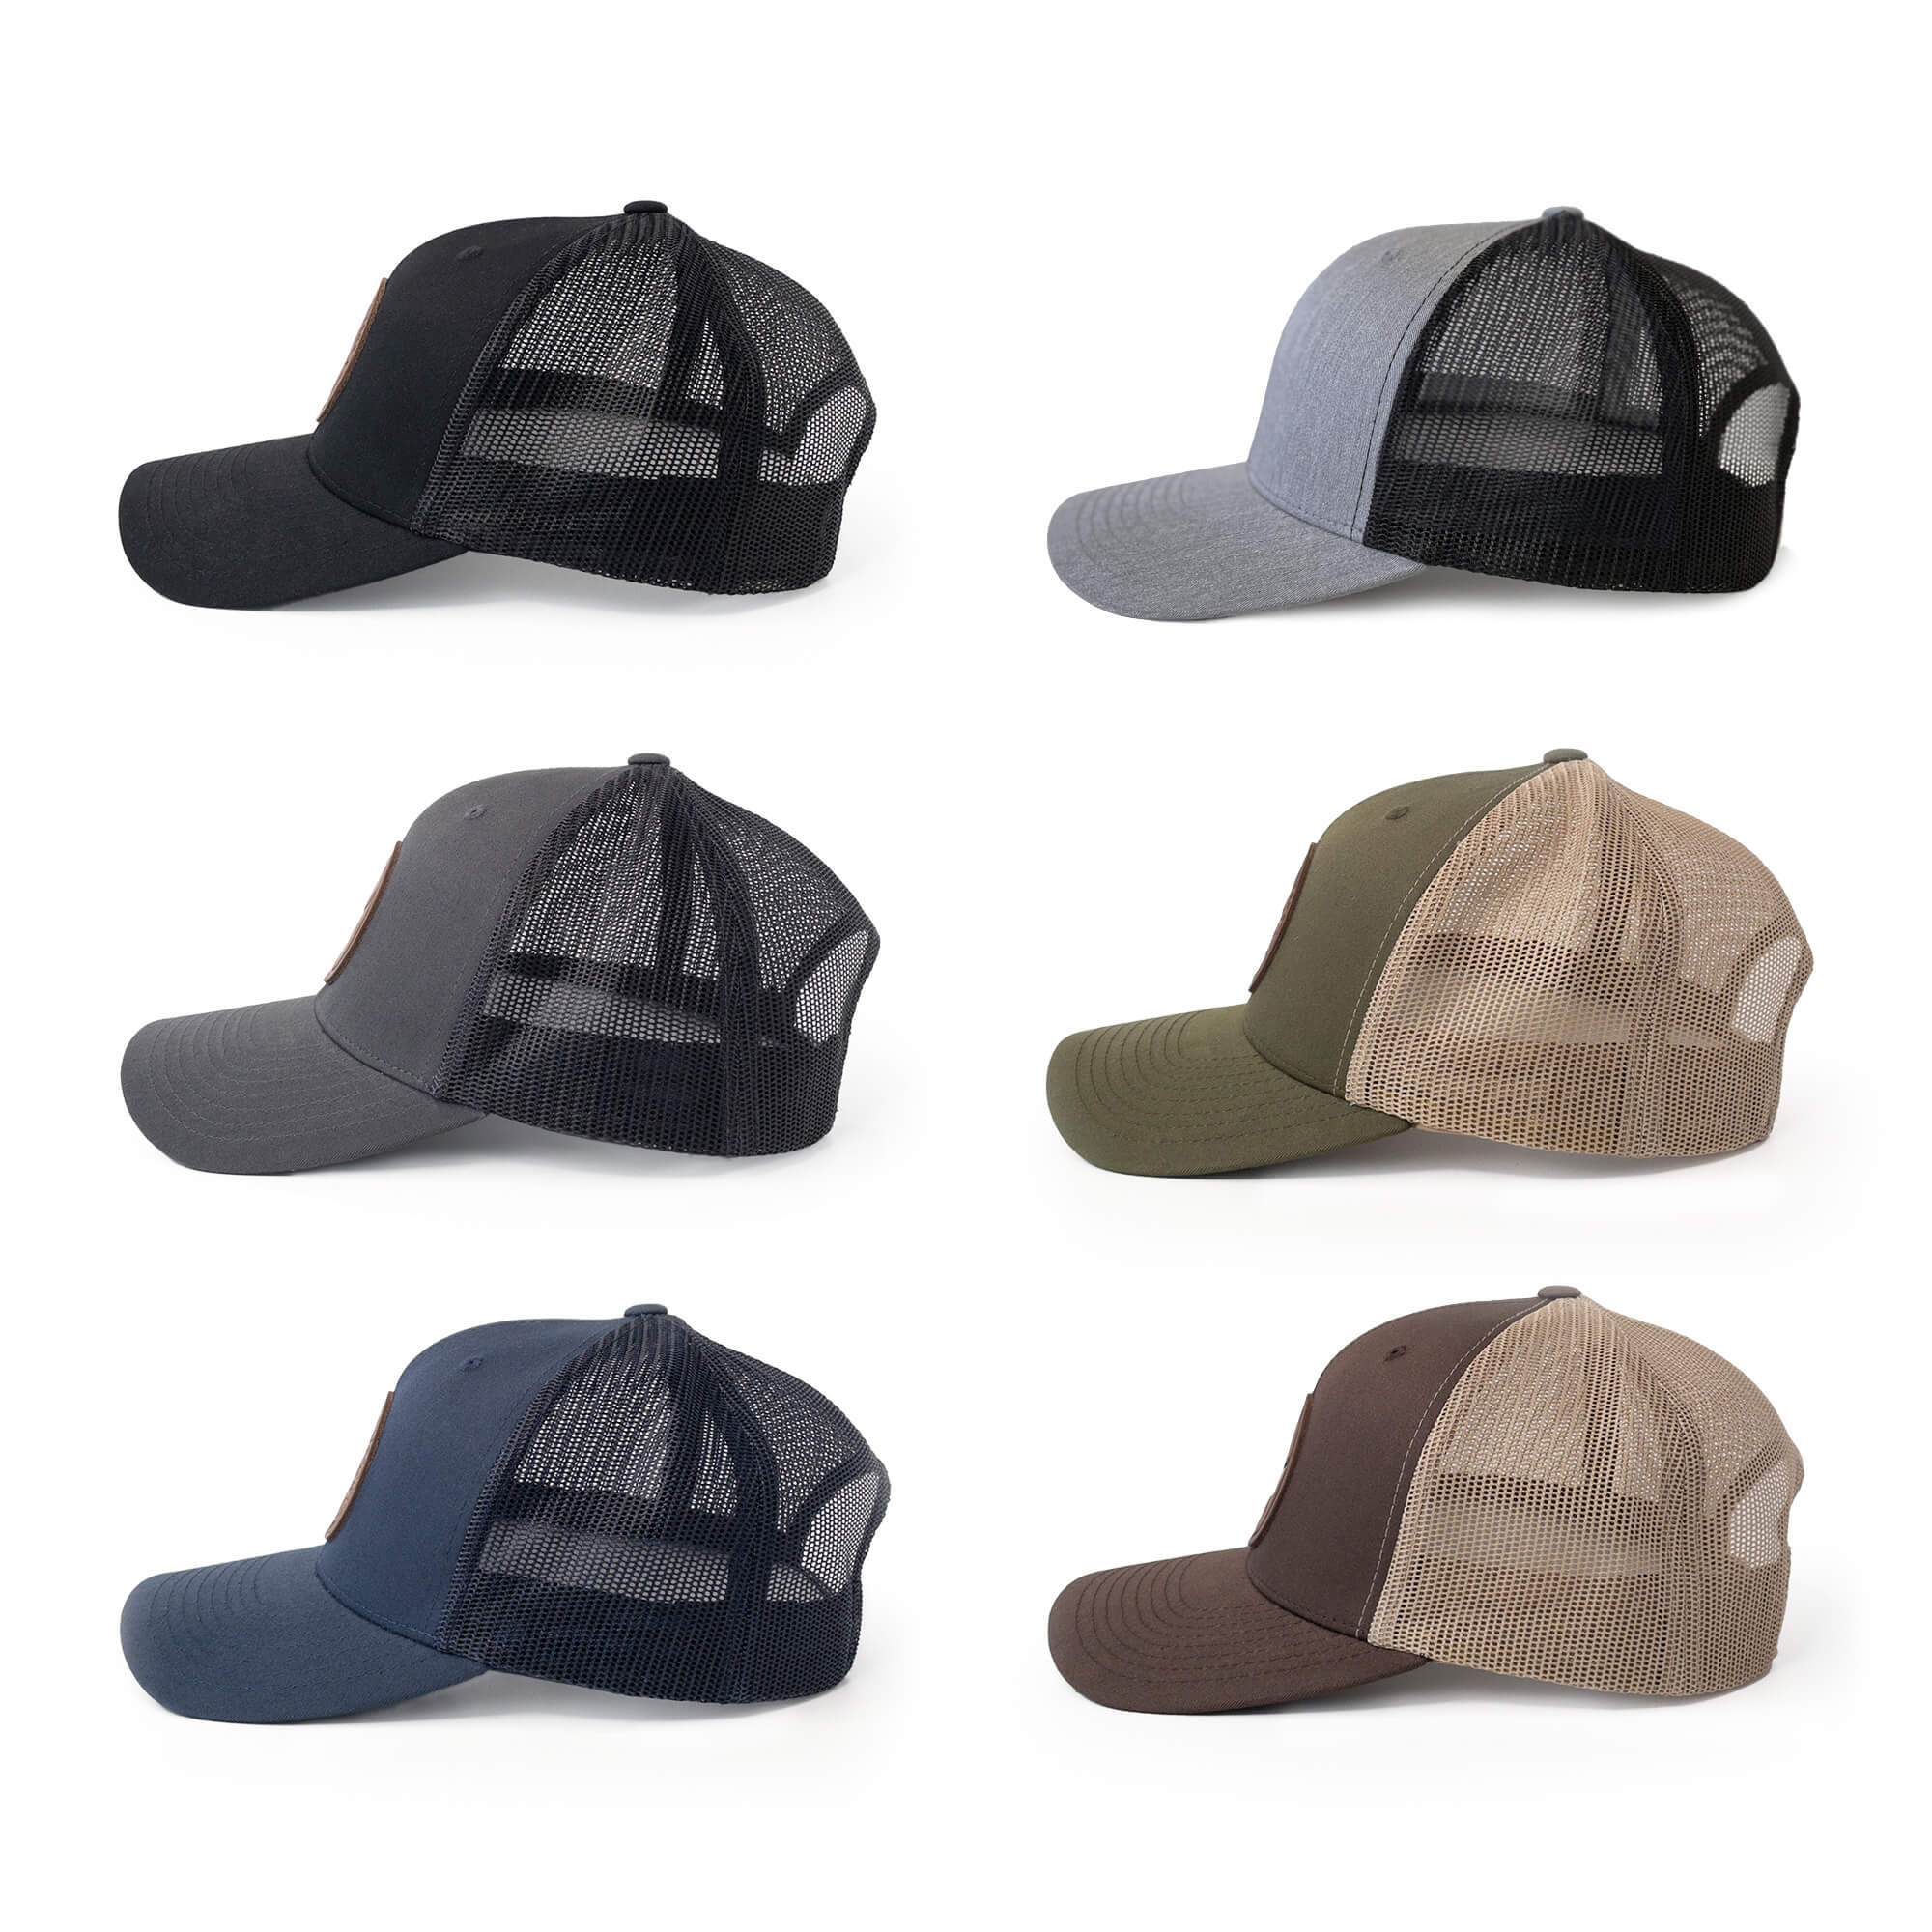 Leather patch trucker hats available in 6 colors | BLACK-007-004, CHARC-007-004, NAVY-007-004, HGREY-007-004, MOSS-007-004, BROWN-007-004